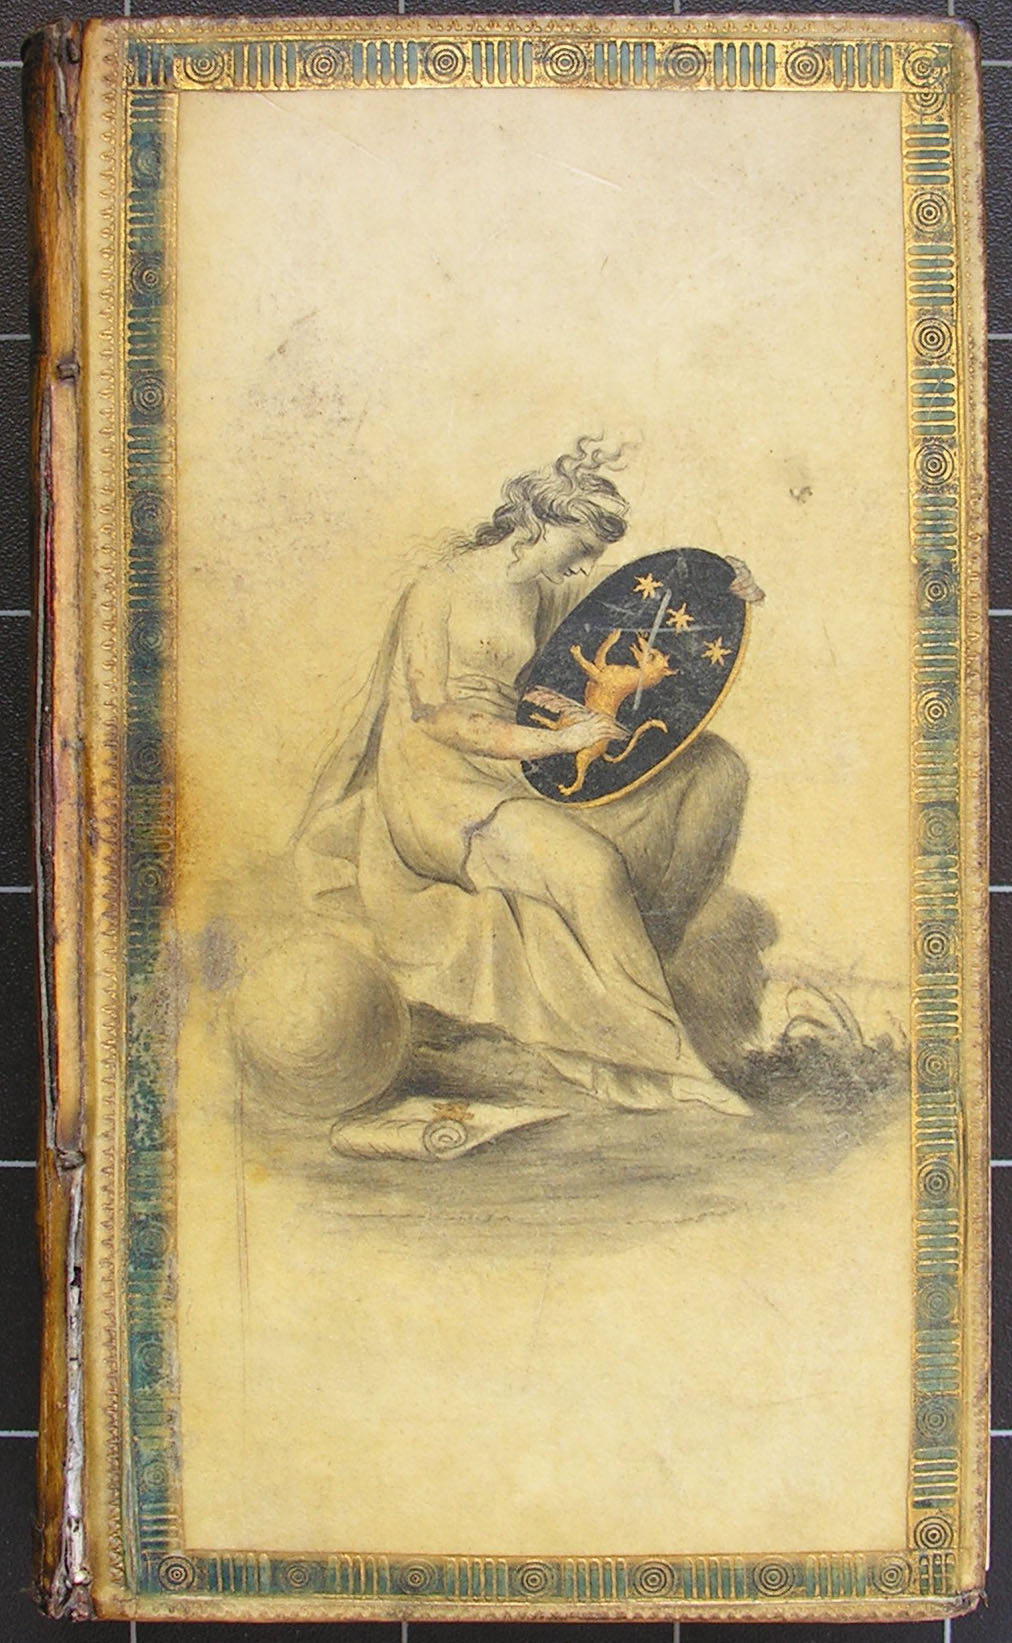 A book bound in painted vellum, illustrated with a woman looking at a shield.